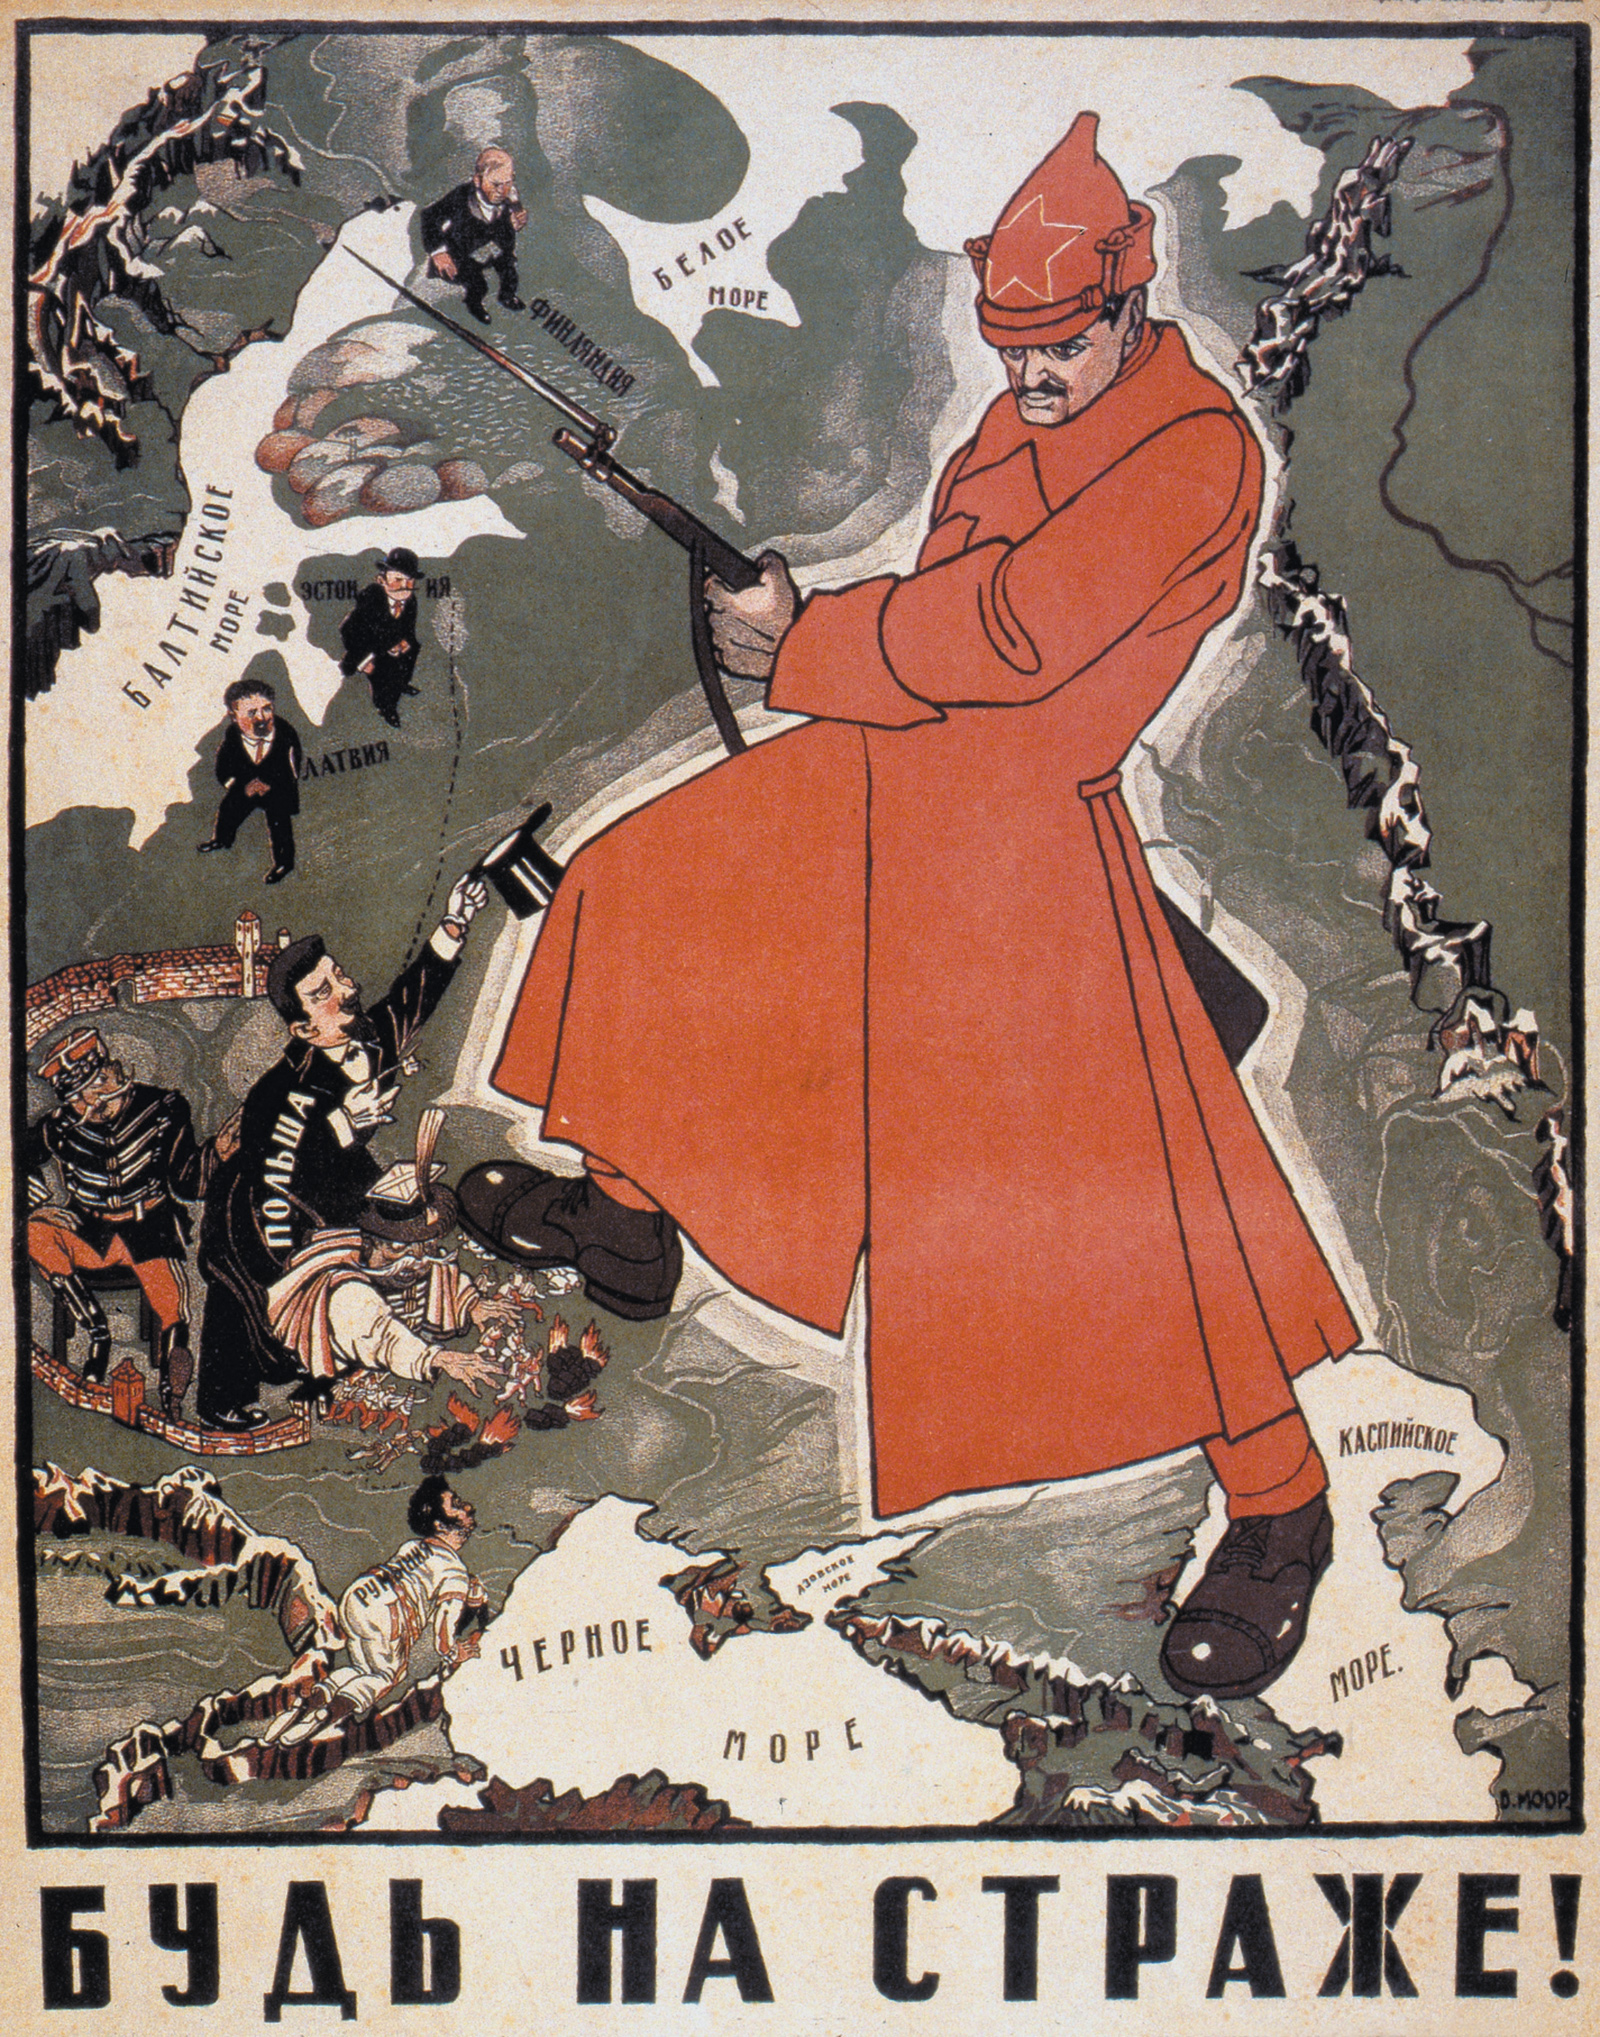 A Soviet propaganda poster with the caption ‘Be on Guard!’ urging Ukrainians, Lithuanians, and Poles to beware of the Polish leader Józef Piłsudski, 1920